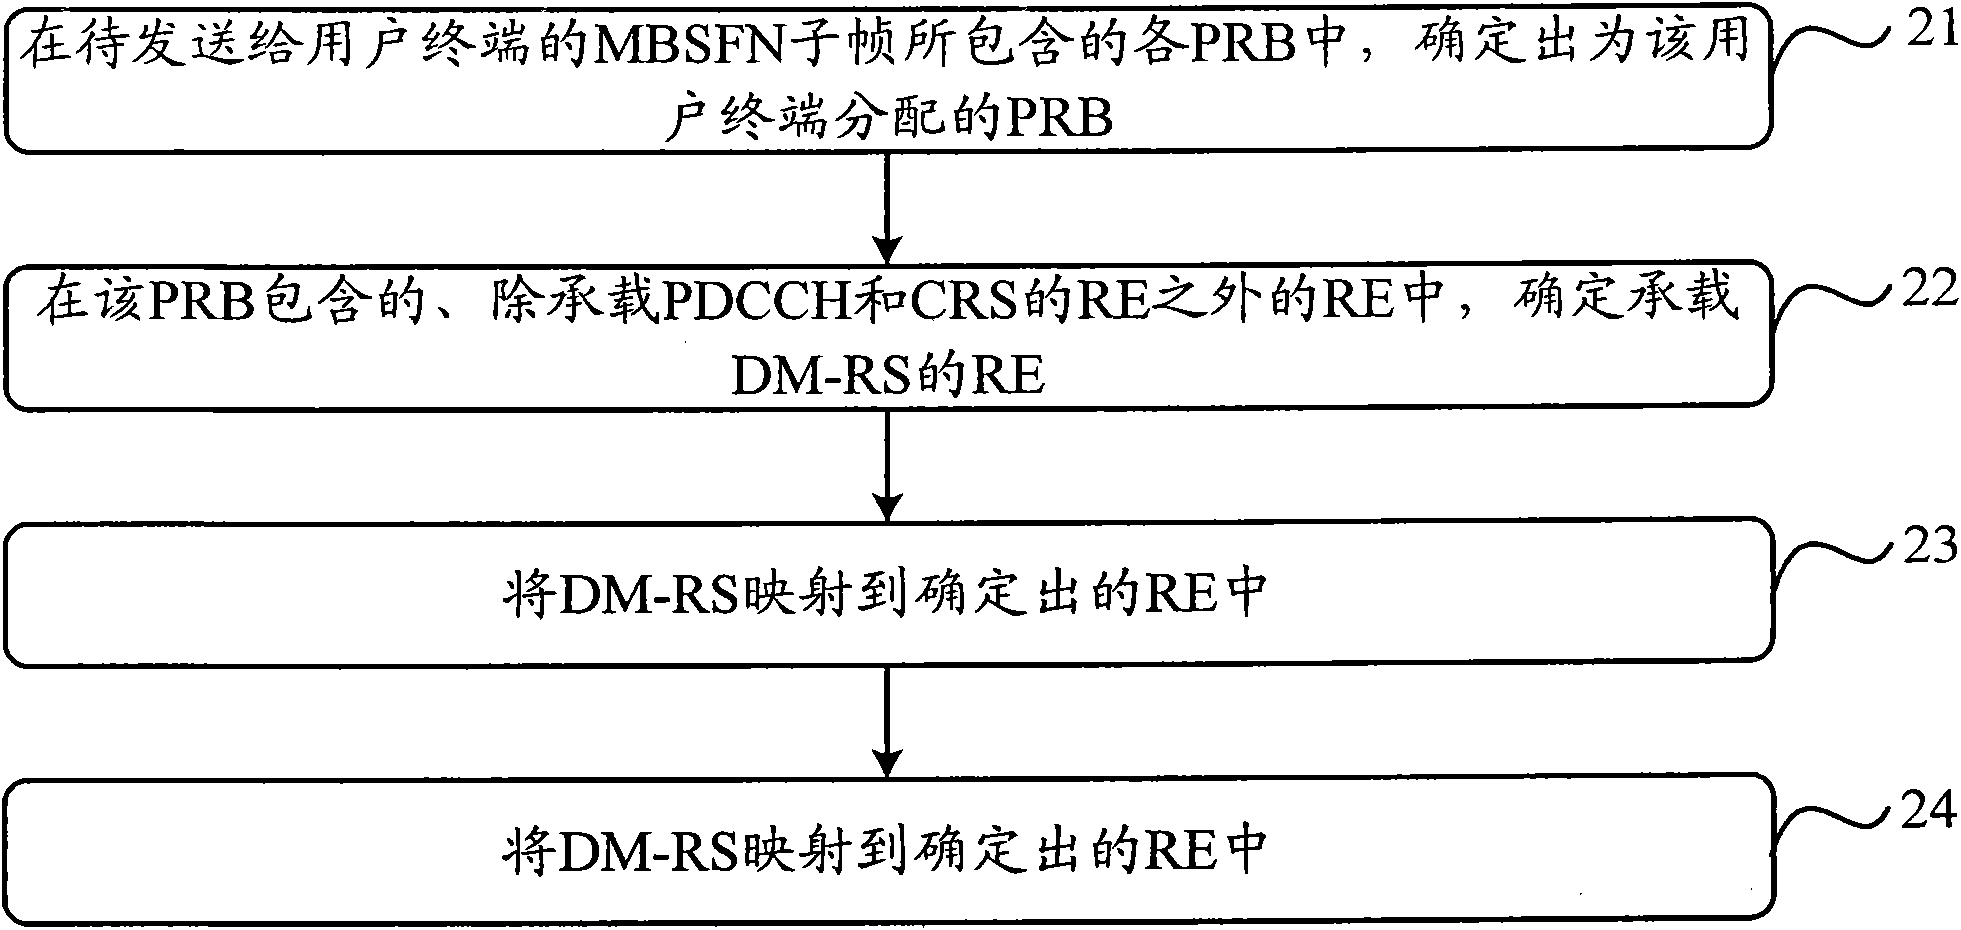 Methods for sending and receiving demodulated reference signal (DM-RS) and devices for sending and receiving DM-RS